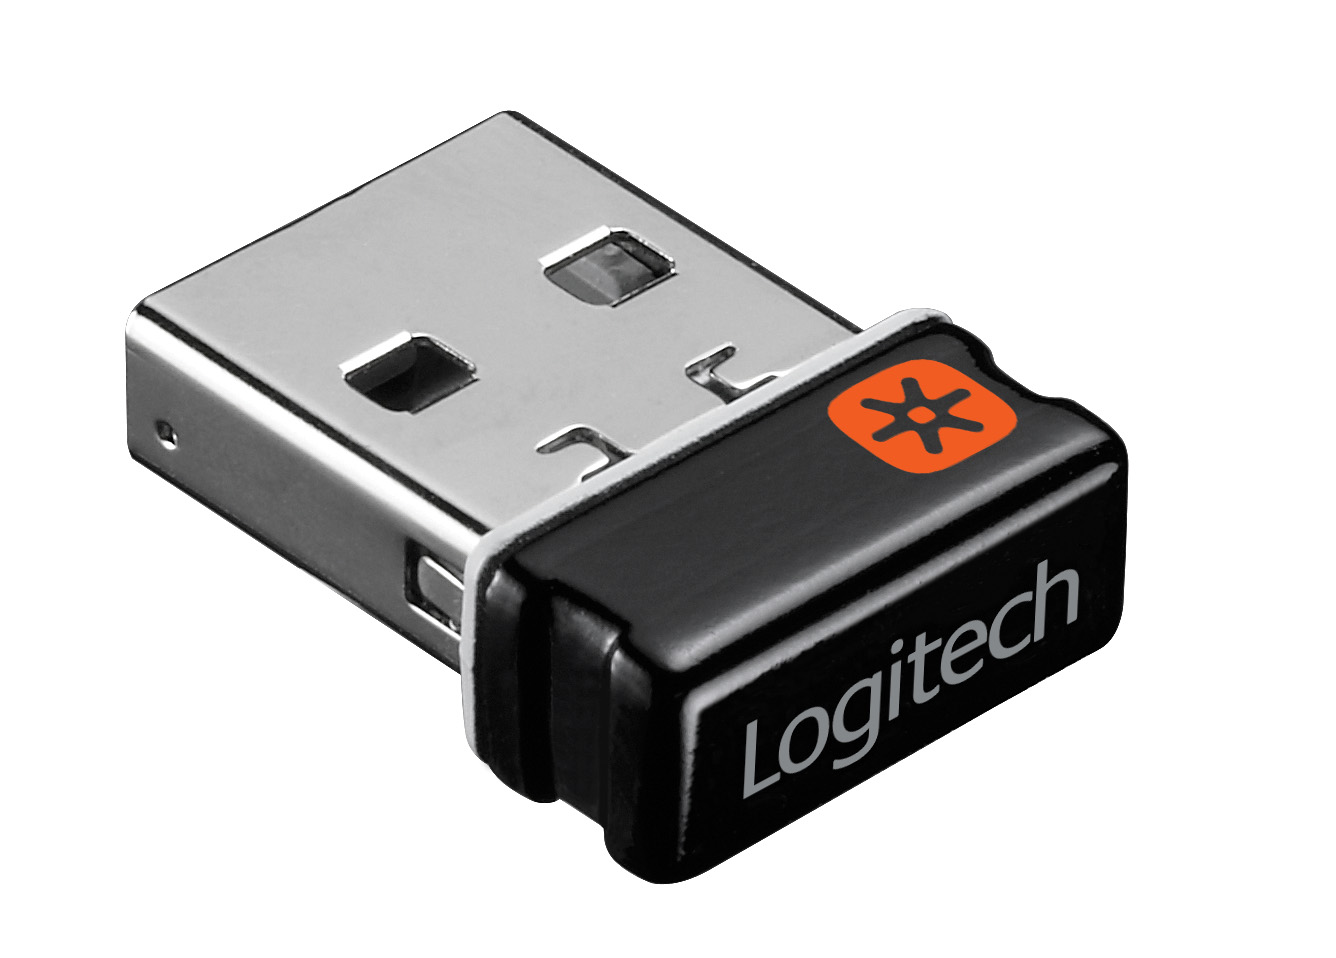 logitech wireless mouse and keyboard usb connect